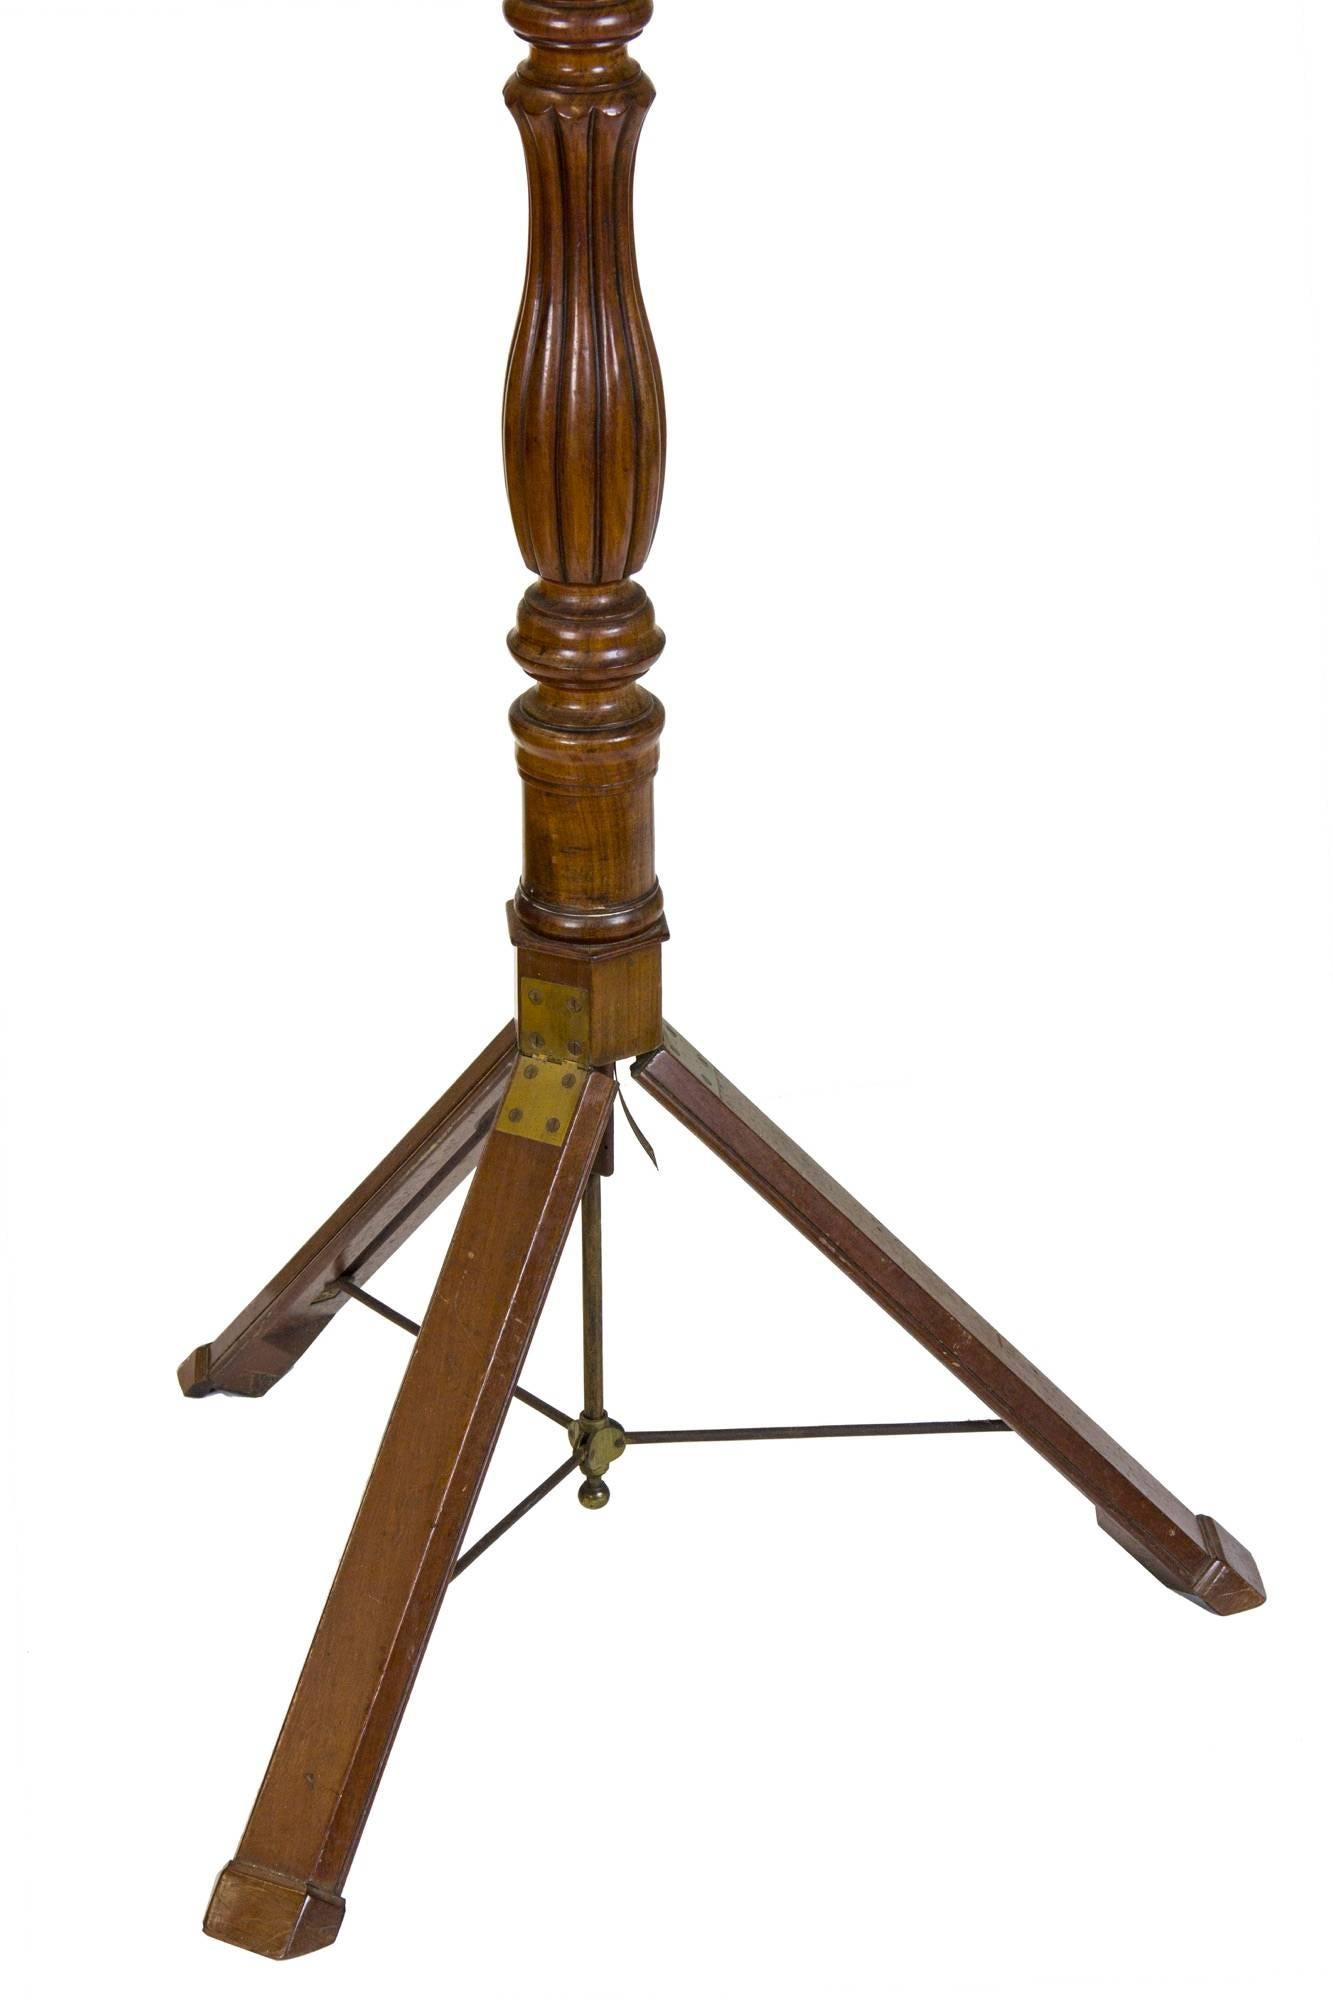 Rare Classical Mahogany Metamorphic Duet Musical Stand, Campaign Furniture For Sale 2